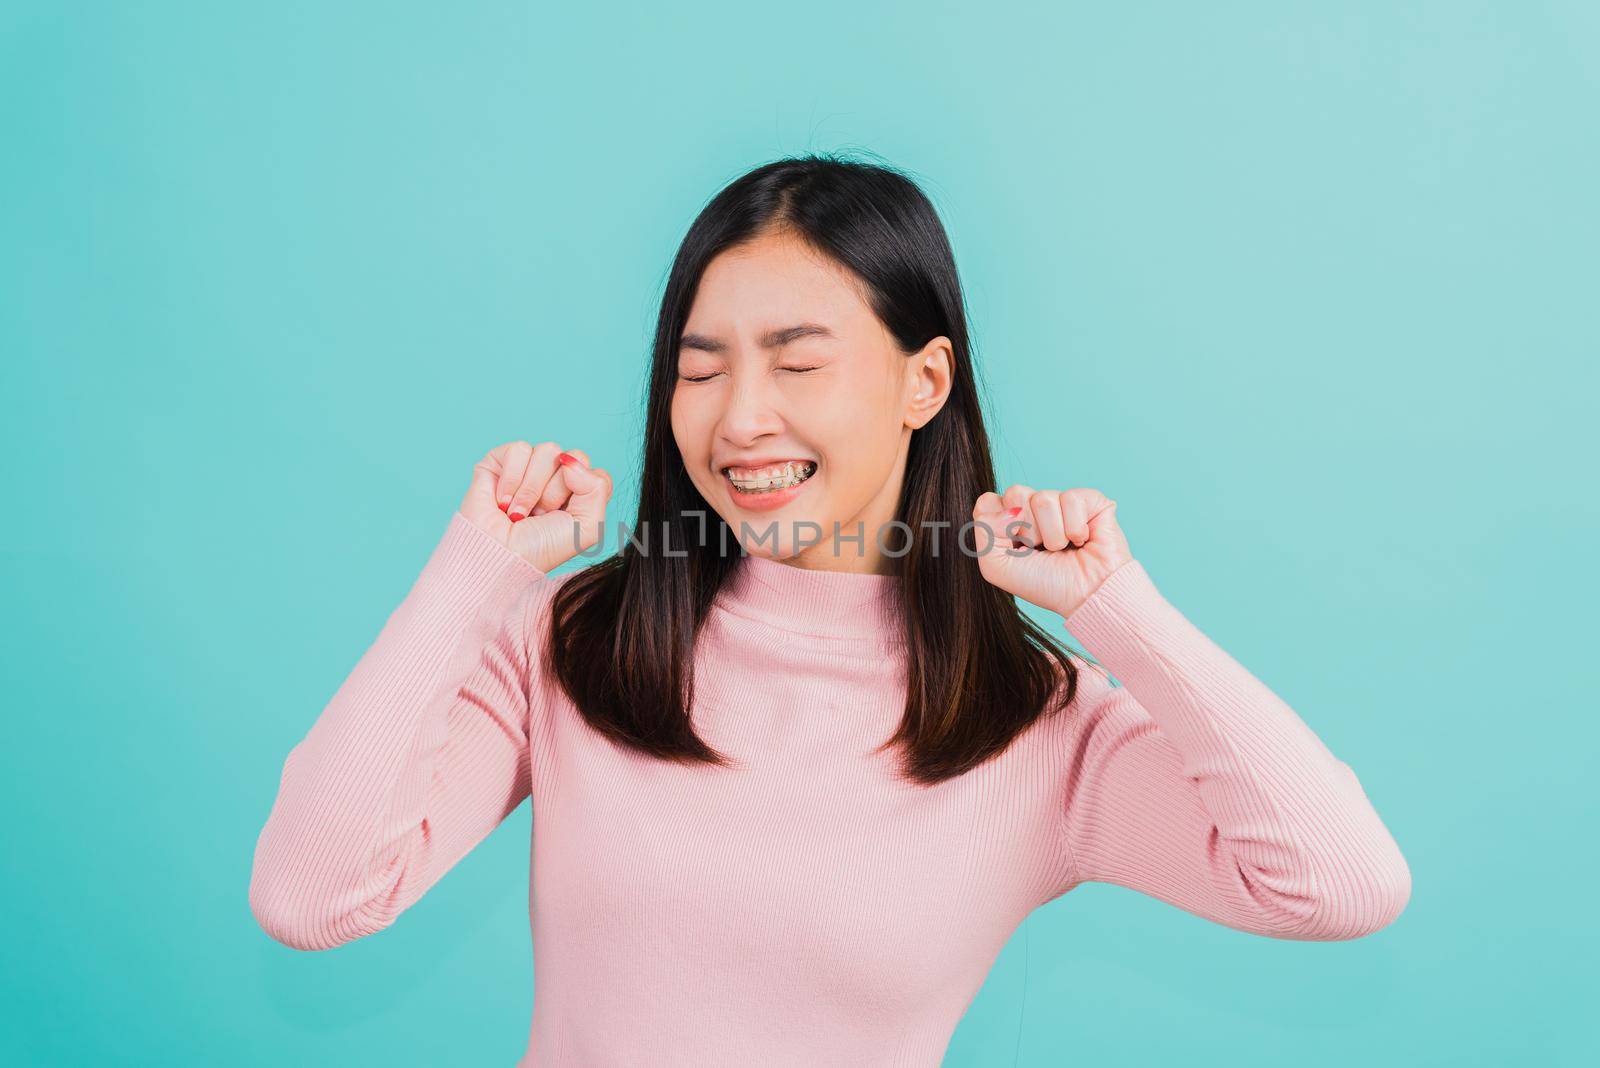 Asian beautiful woman smiling wear silicone orthodontic retainers on teeth surprised she is excited screaming and raise hand make gestures wow by Sorapop